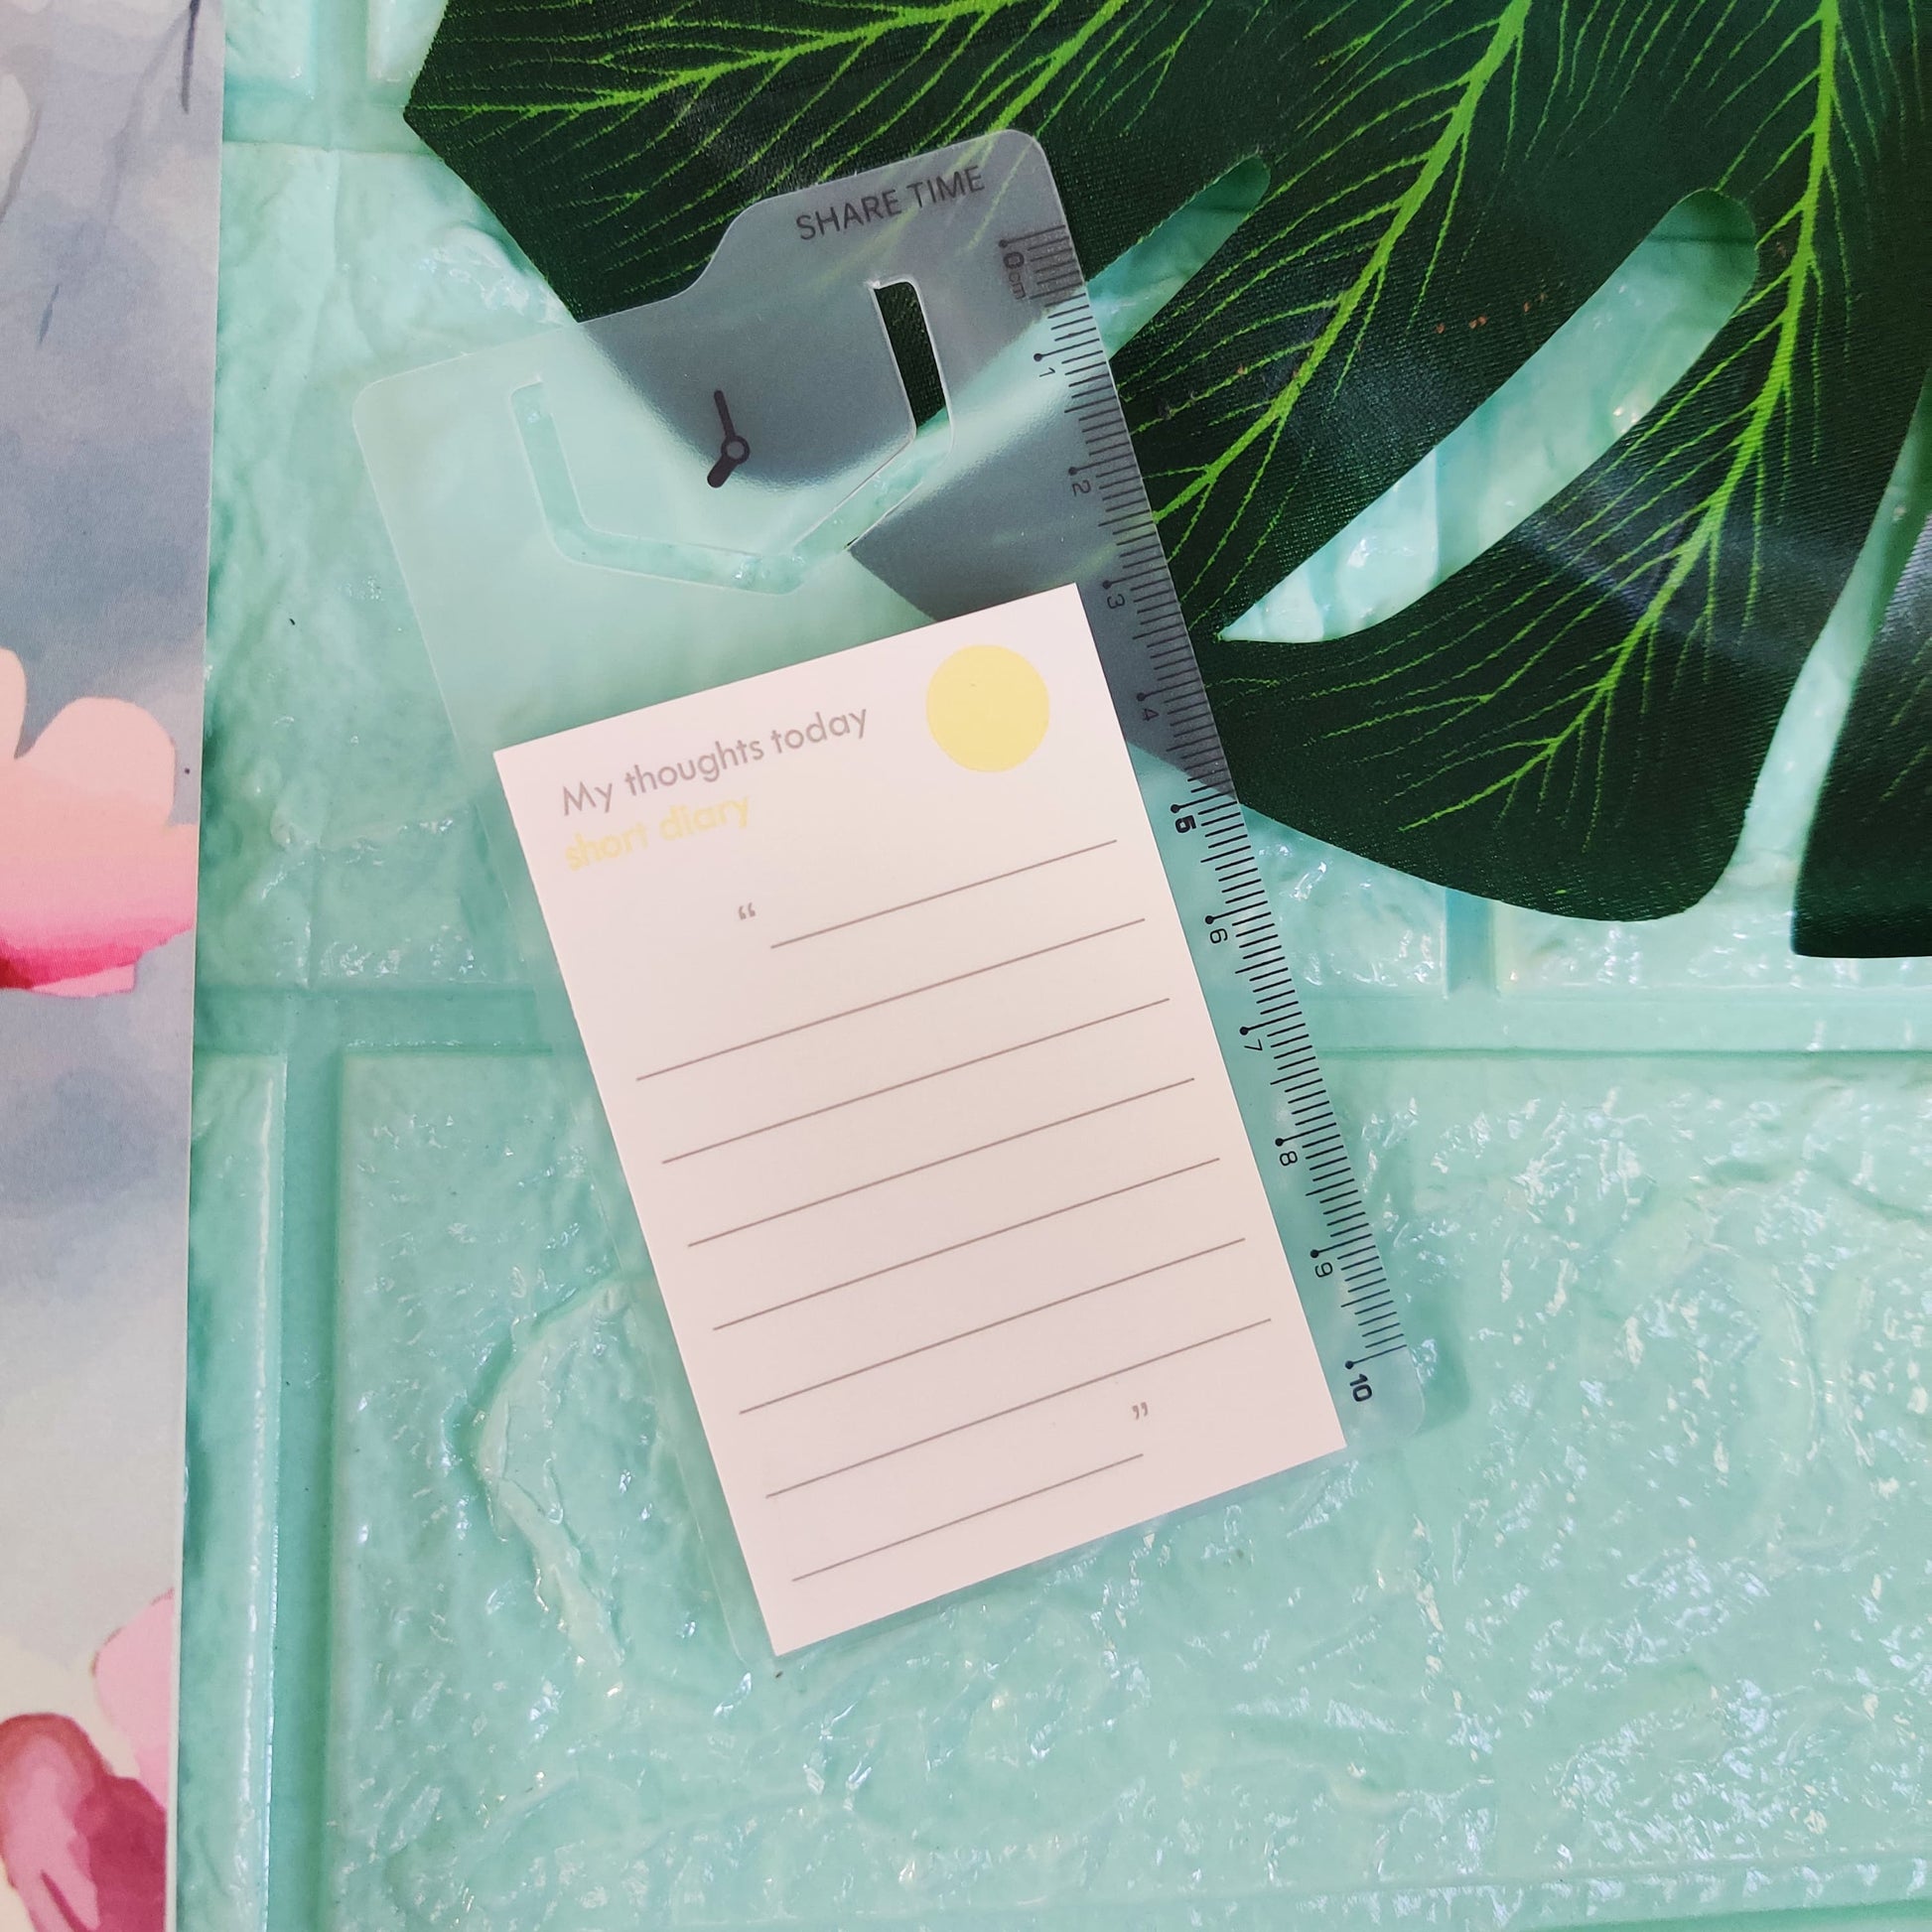 UB collection/Shop rahega. My thoughts today Mini TO-DO Post it Sticky Notes | get organised with sticky Notes | 32 Sheets |